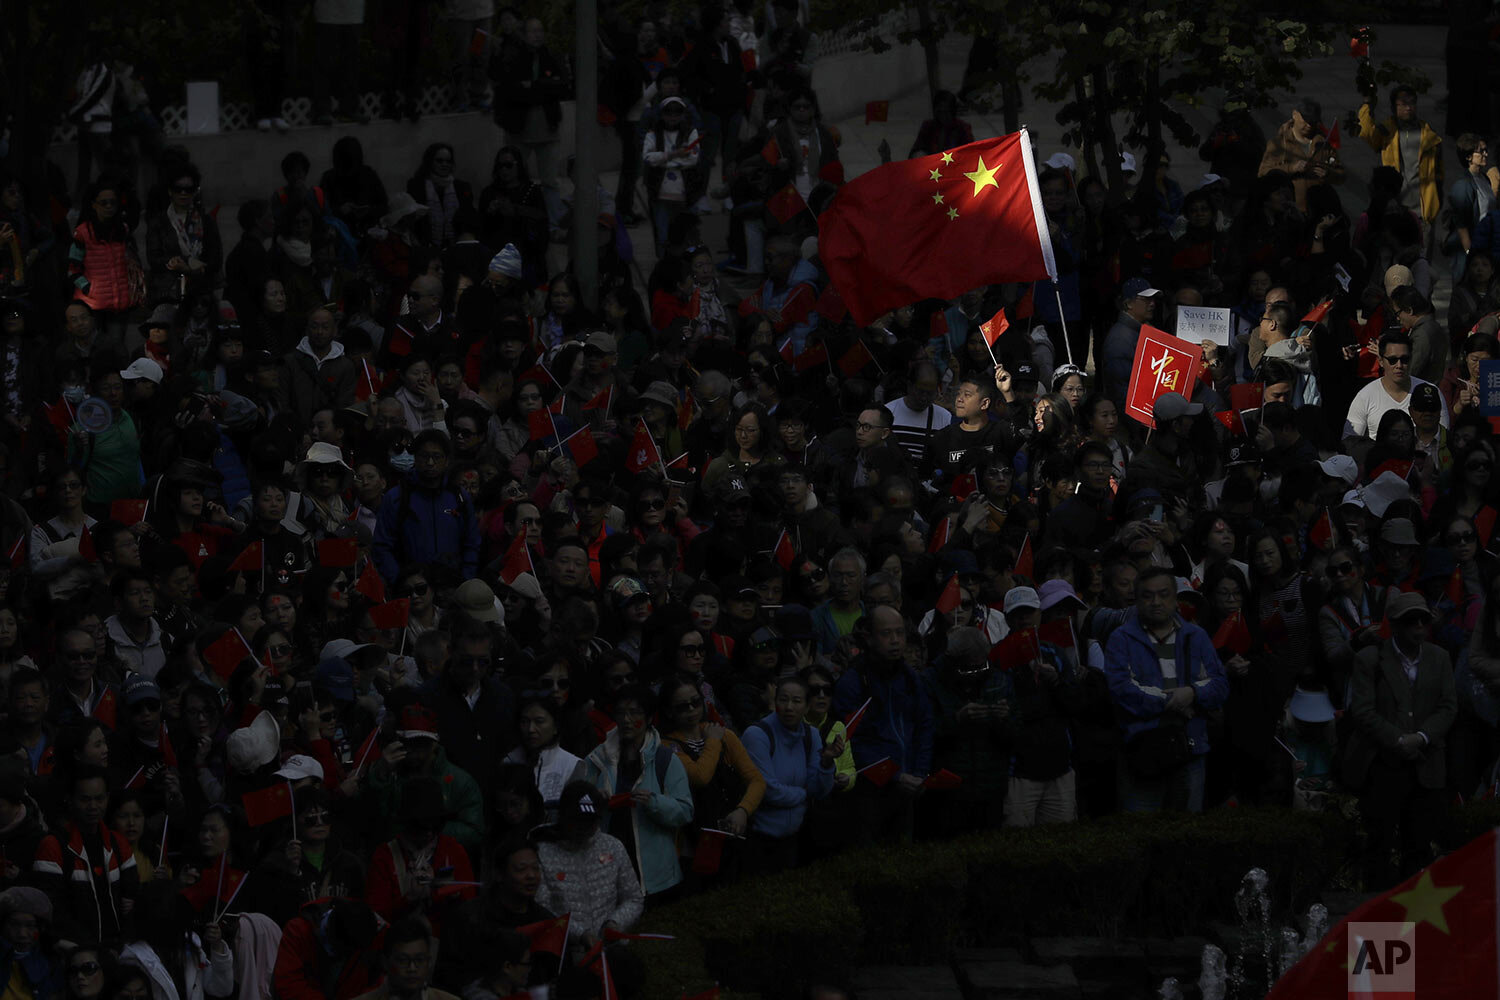  Pro-Beijing supporters wave the Chinese national flags during a rally in Hong Kong on Saturday, Dec. 7, 2019. (AP Photo/Mark Schiefelbein) 